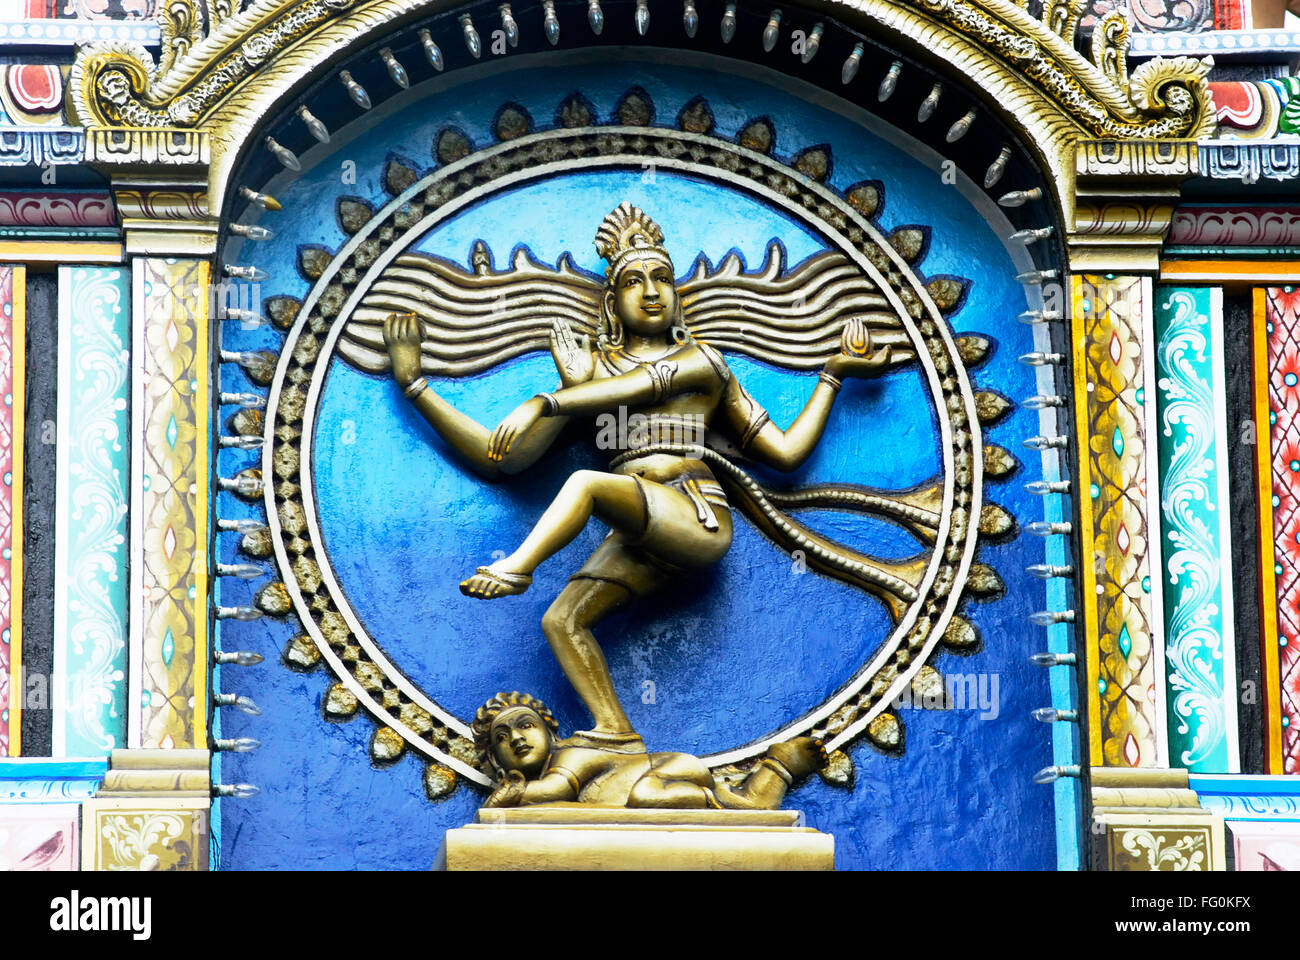 Nataraja: The Lord of All the Three Worlds - Artisans Crest